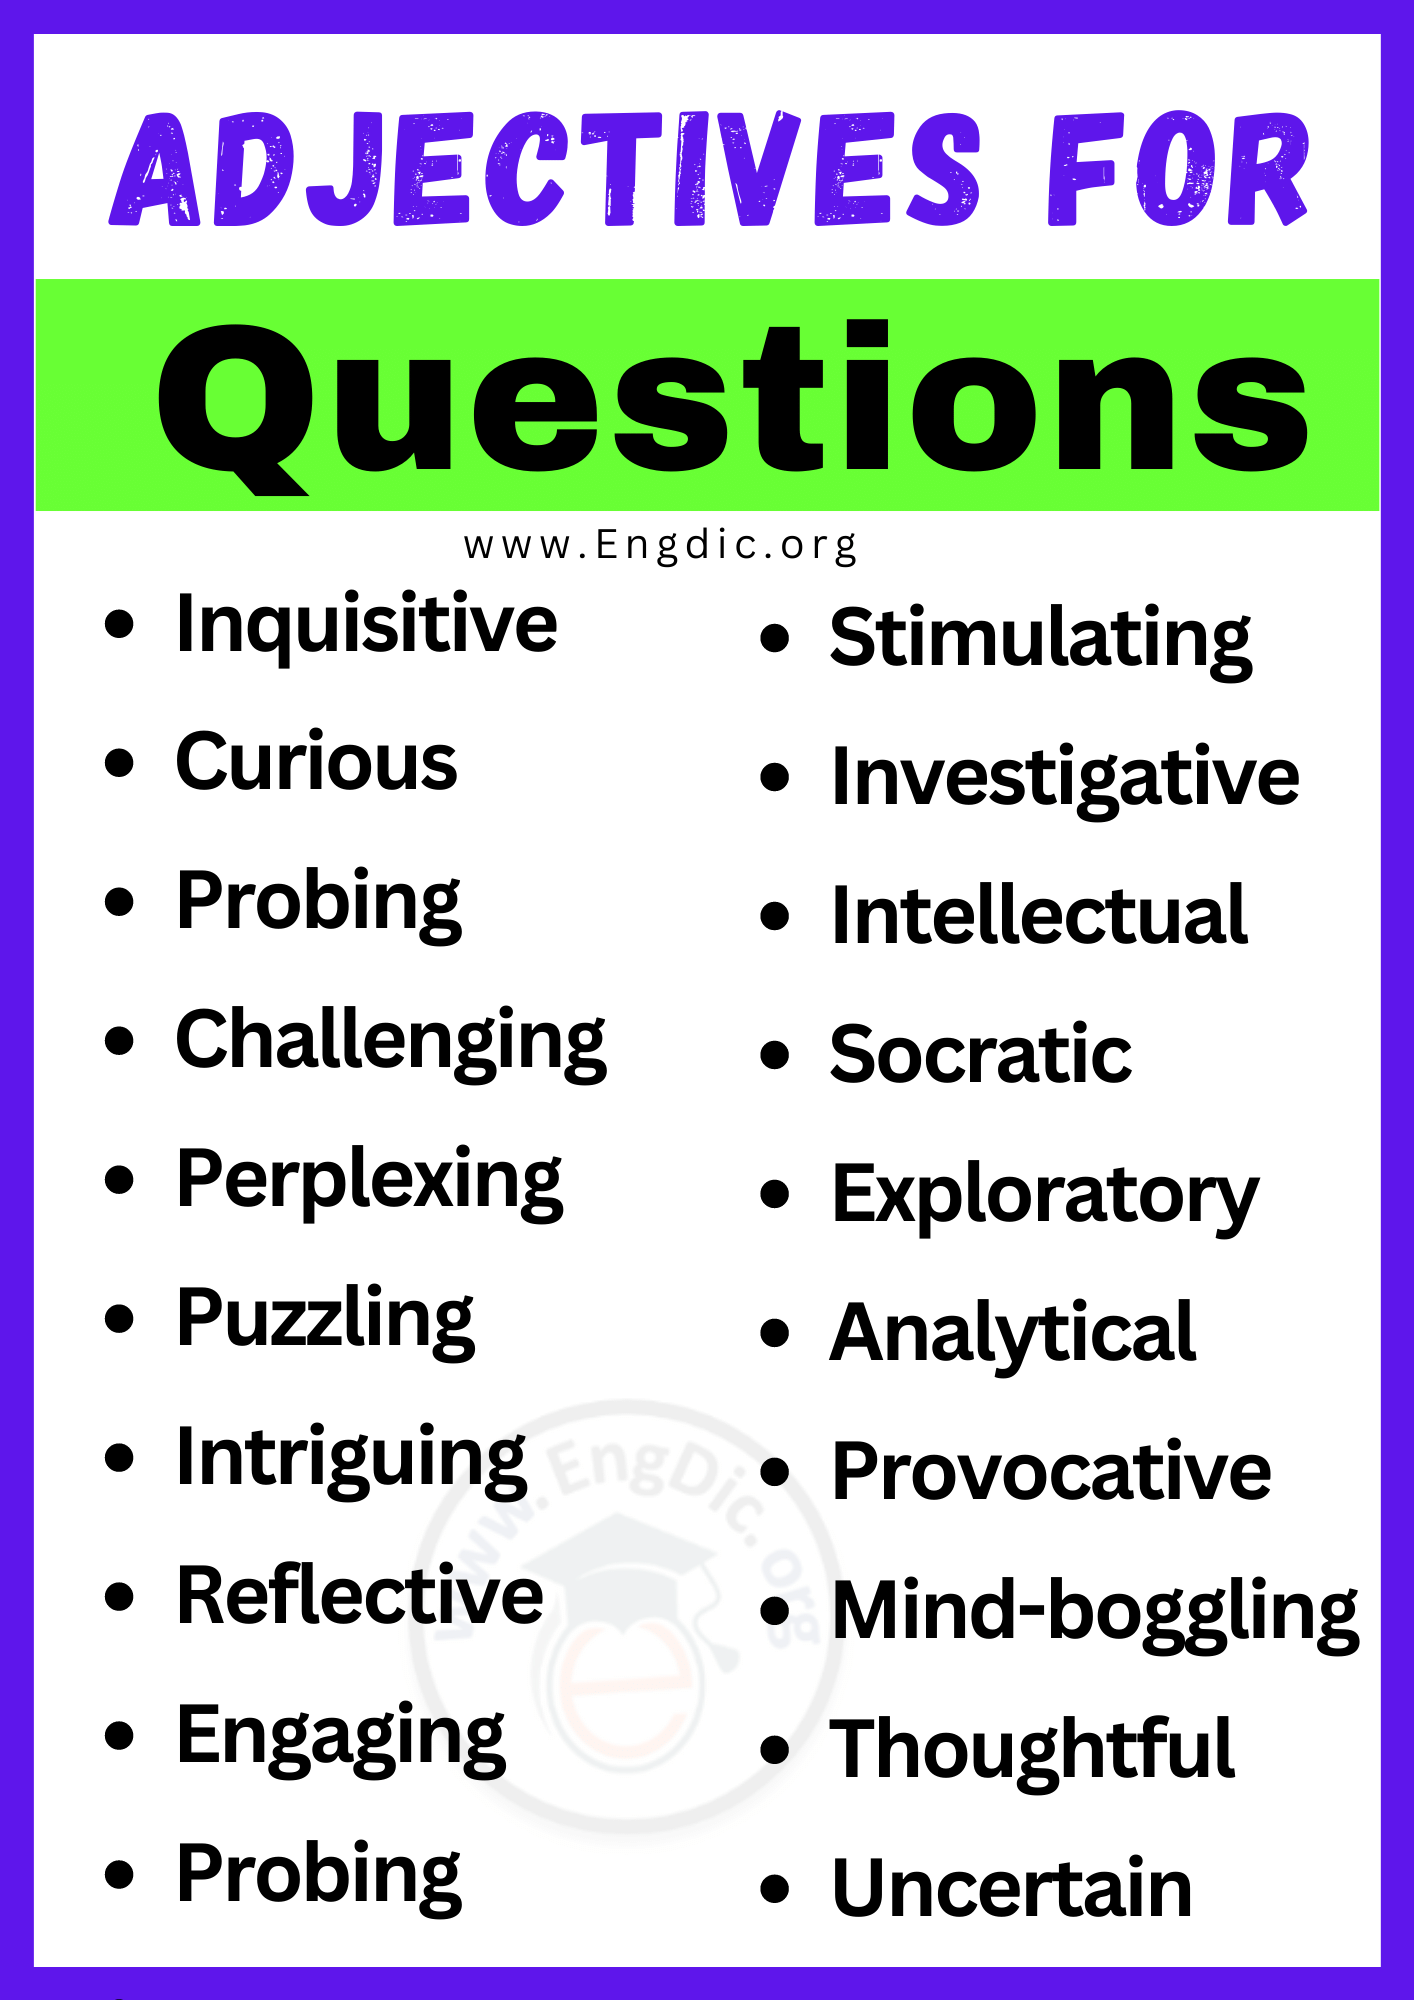 Adjectives for Questions